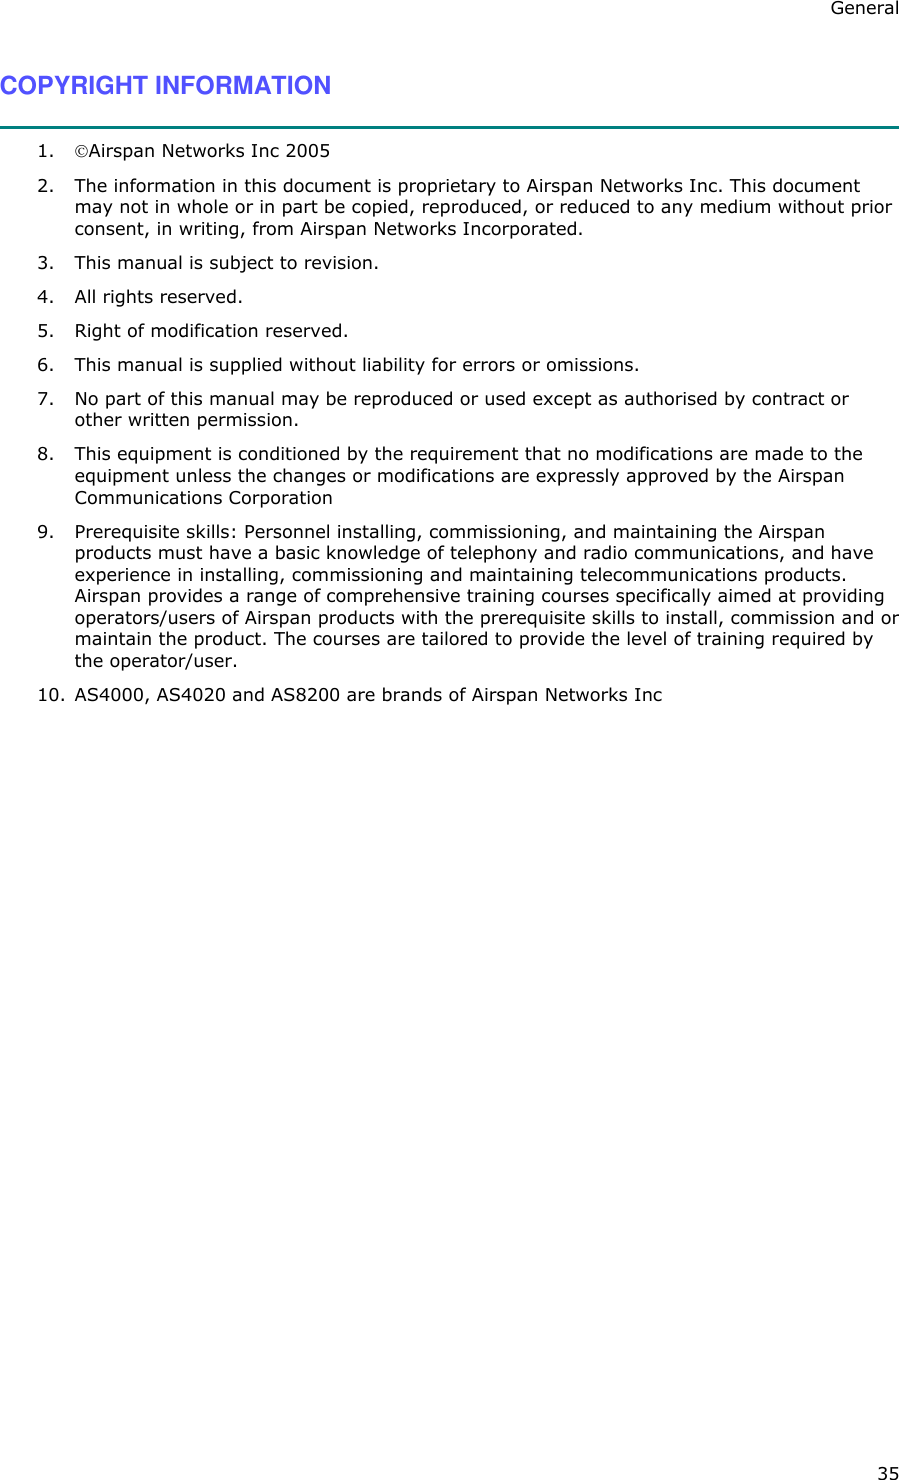 General 35 COPYRIGHT INFORMATION  1.  Airspan Networks Inc 2005 2.  The information in this document is proprietary to Airspan Networks Inc. This document may not in whole or in part be copied, reproduced, or reduced to any medium without prior consent, in writing, from Airspan Networks Incorporated.  3.  This manual is subject to revision. 4.  All rights reserved. 5.  Right of modification reserved. 6.  This manual is supplied without liability for errors or omissions. 7.  No part of this manual may be reproduced or used except as authorised by contract or other written permission. 8.  This equipment is conditioned by the requirement that no modifications are made to the equipment unless the changes or modifications are expressly approved by the Airspan Communications Corporation 9.  Prerequisite skills: Personnel installing, commissioning, and maintaining the Airspan products must have a basic knowledge of telephony and radio communications, and have experience in installing, commissioning and maintaining telecommunications products. Airspan provides a range of comprehensive training courses specifically aimed at providing operators/users of Airspan products with the prerequisite skills to install, commission and or maintain the product. The courses are tailored to provide the level of training required by the operator/user. 10.  AS4000, AS4020 and AS8200 are brands of Airspan Networks Inc  